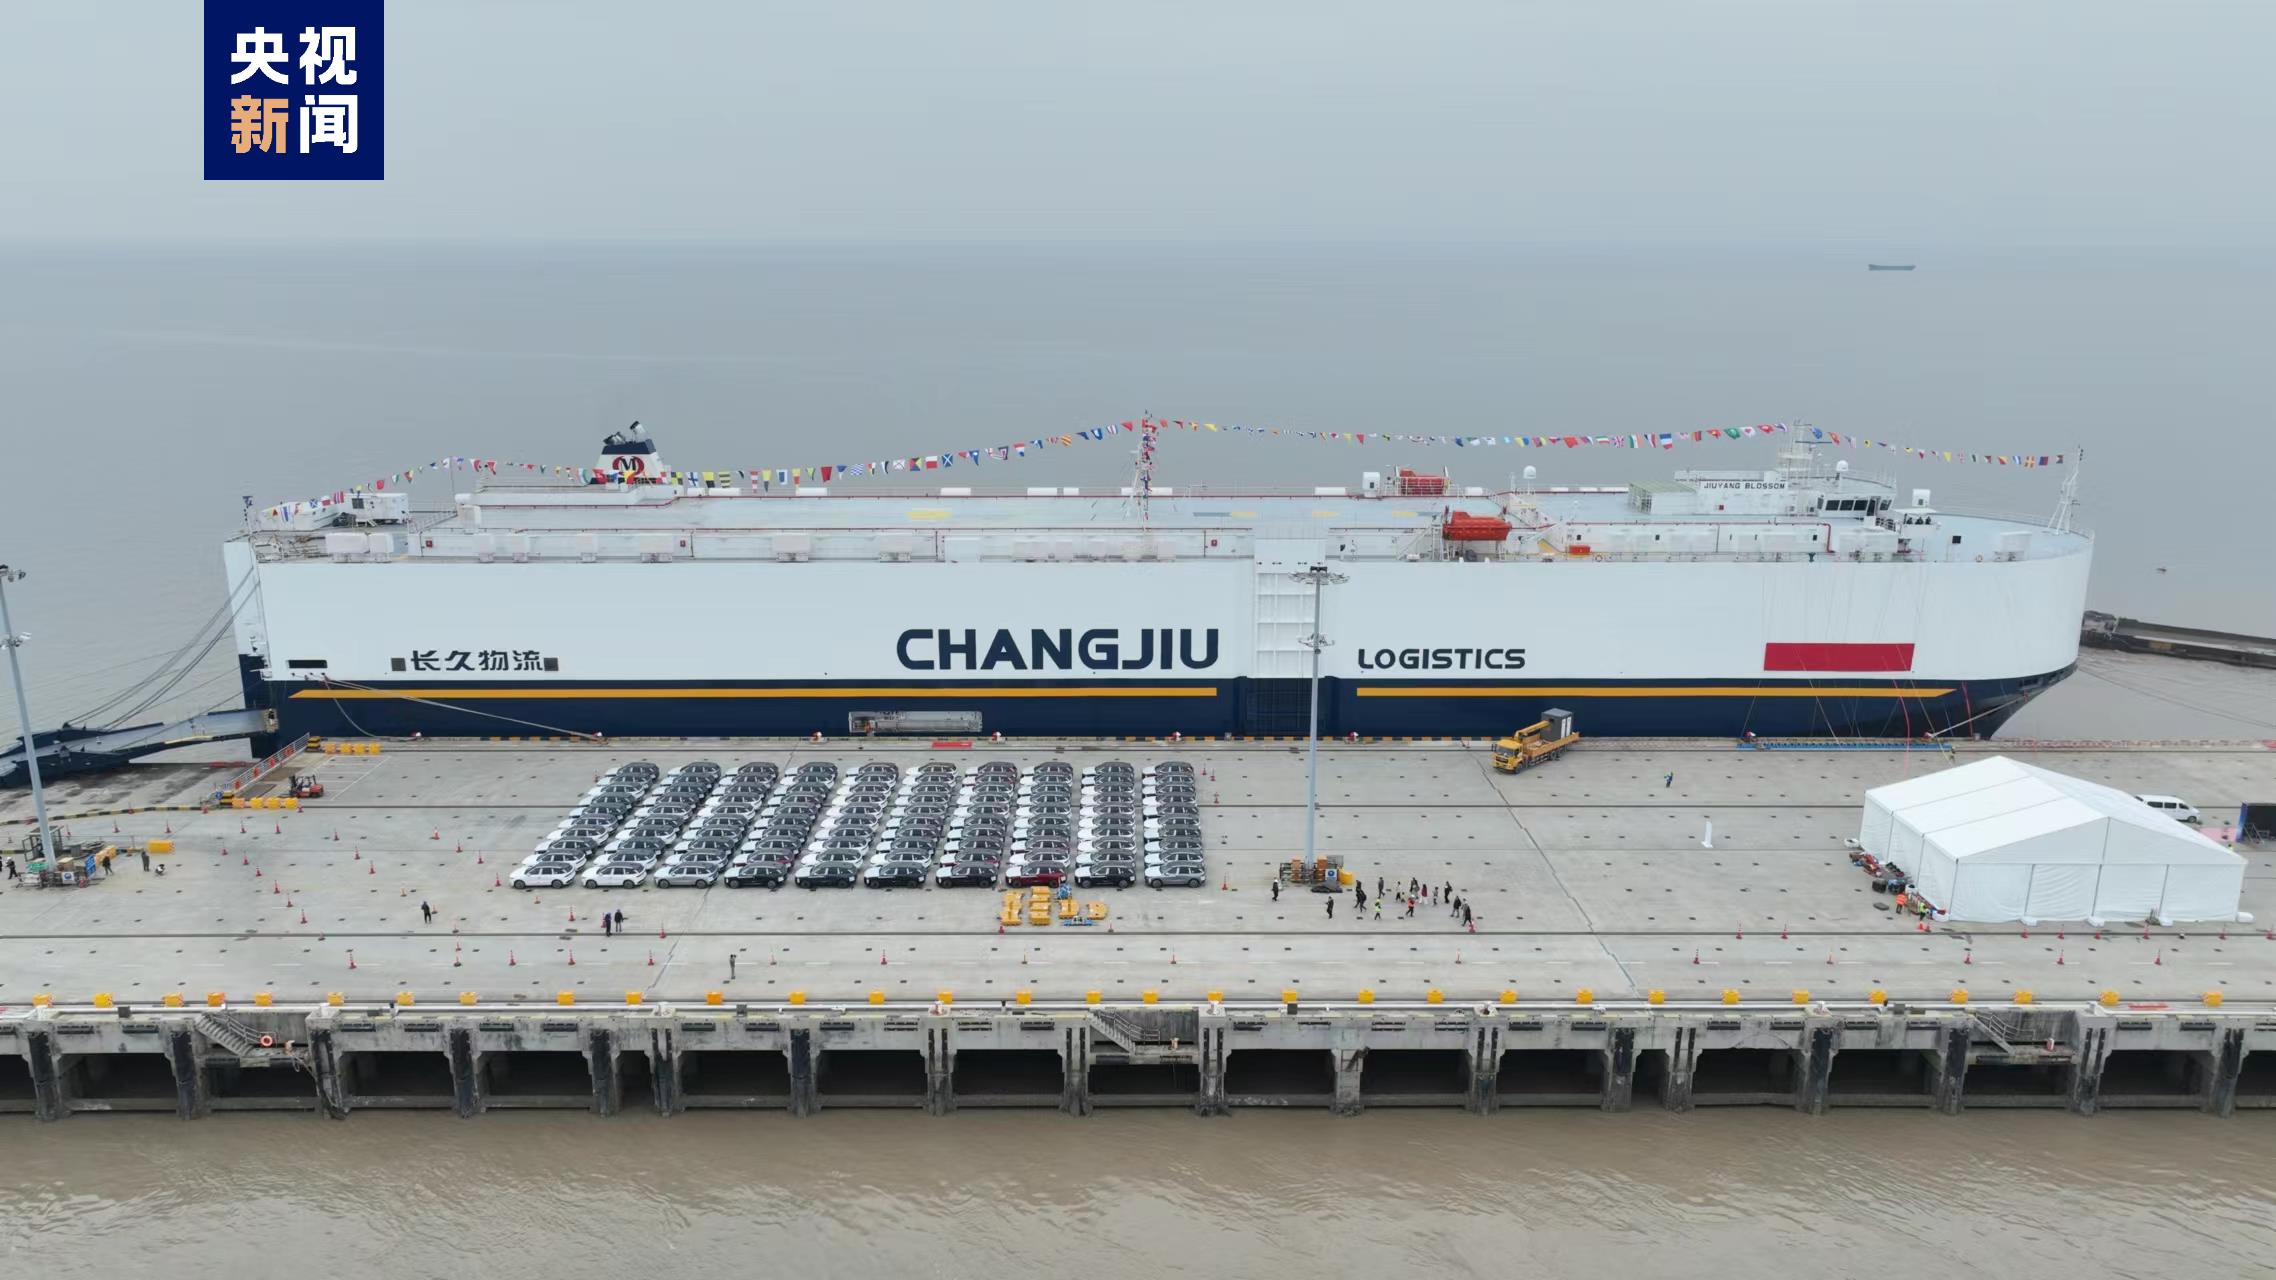 The Jiuyangxing ro-ro ship is China's largest car carrier so far. /CMG